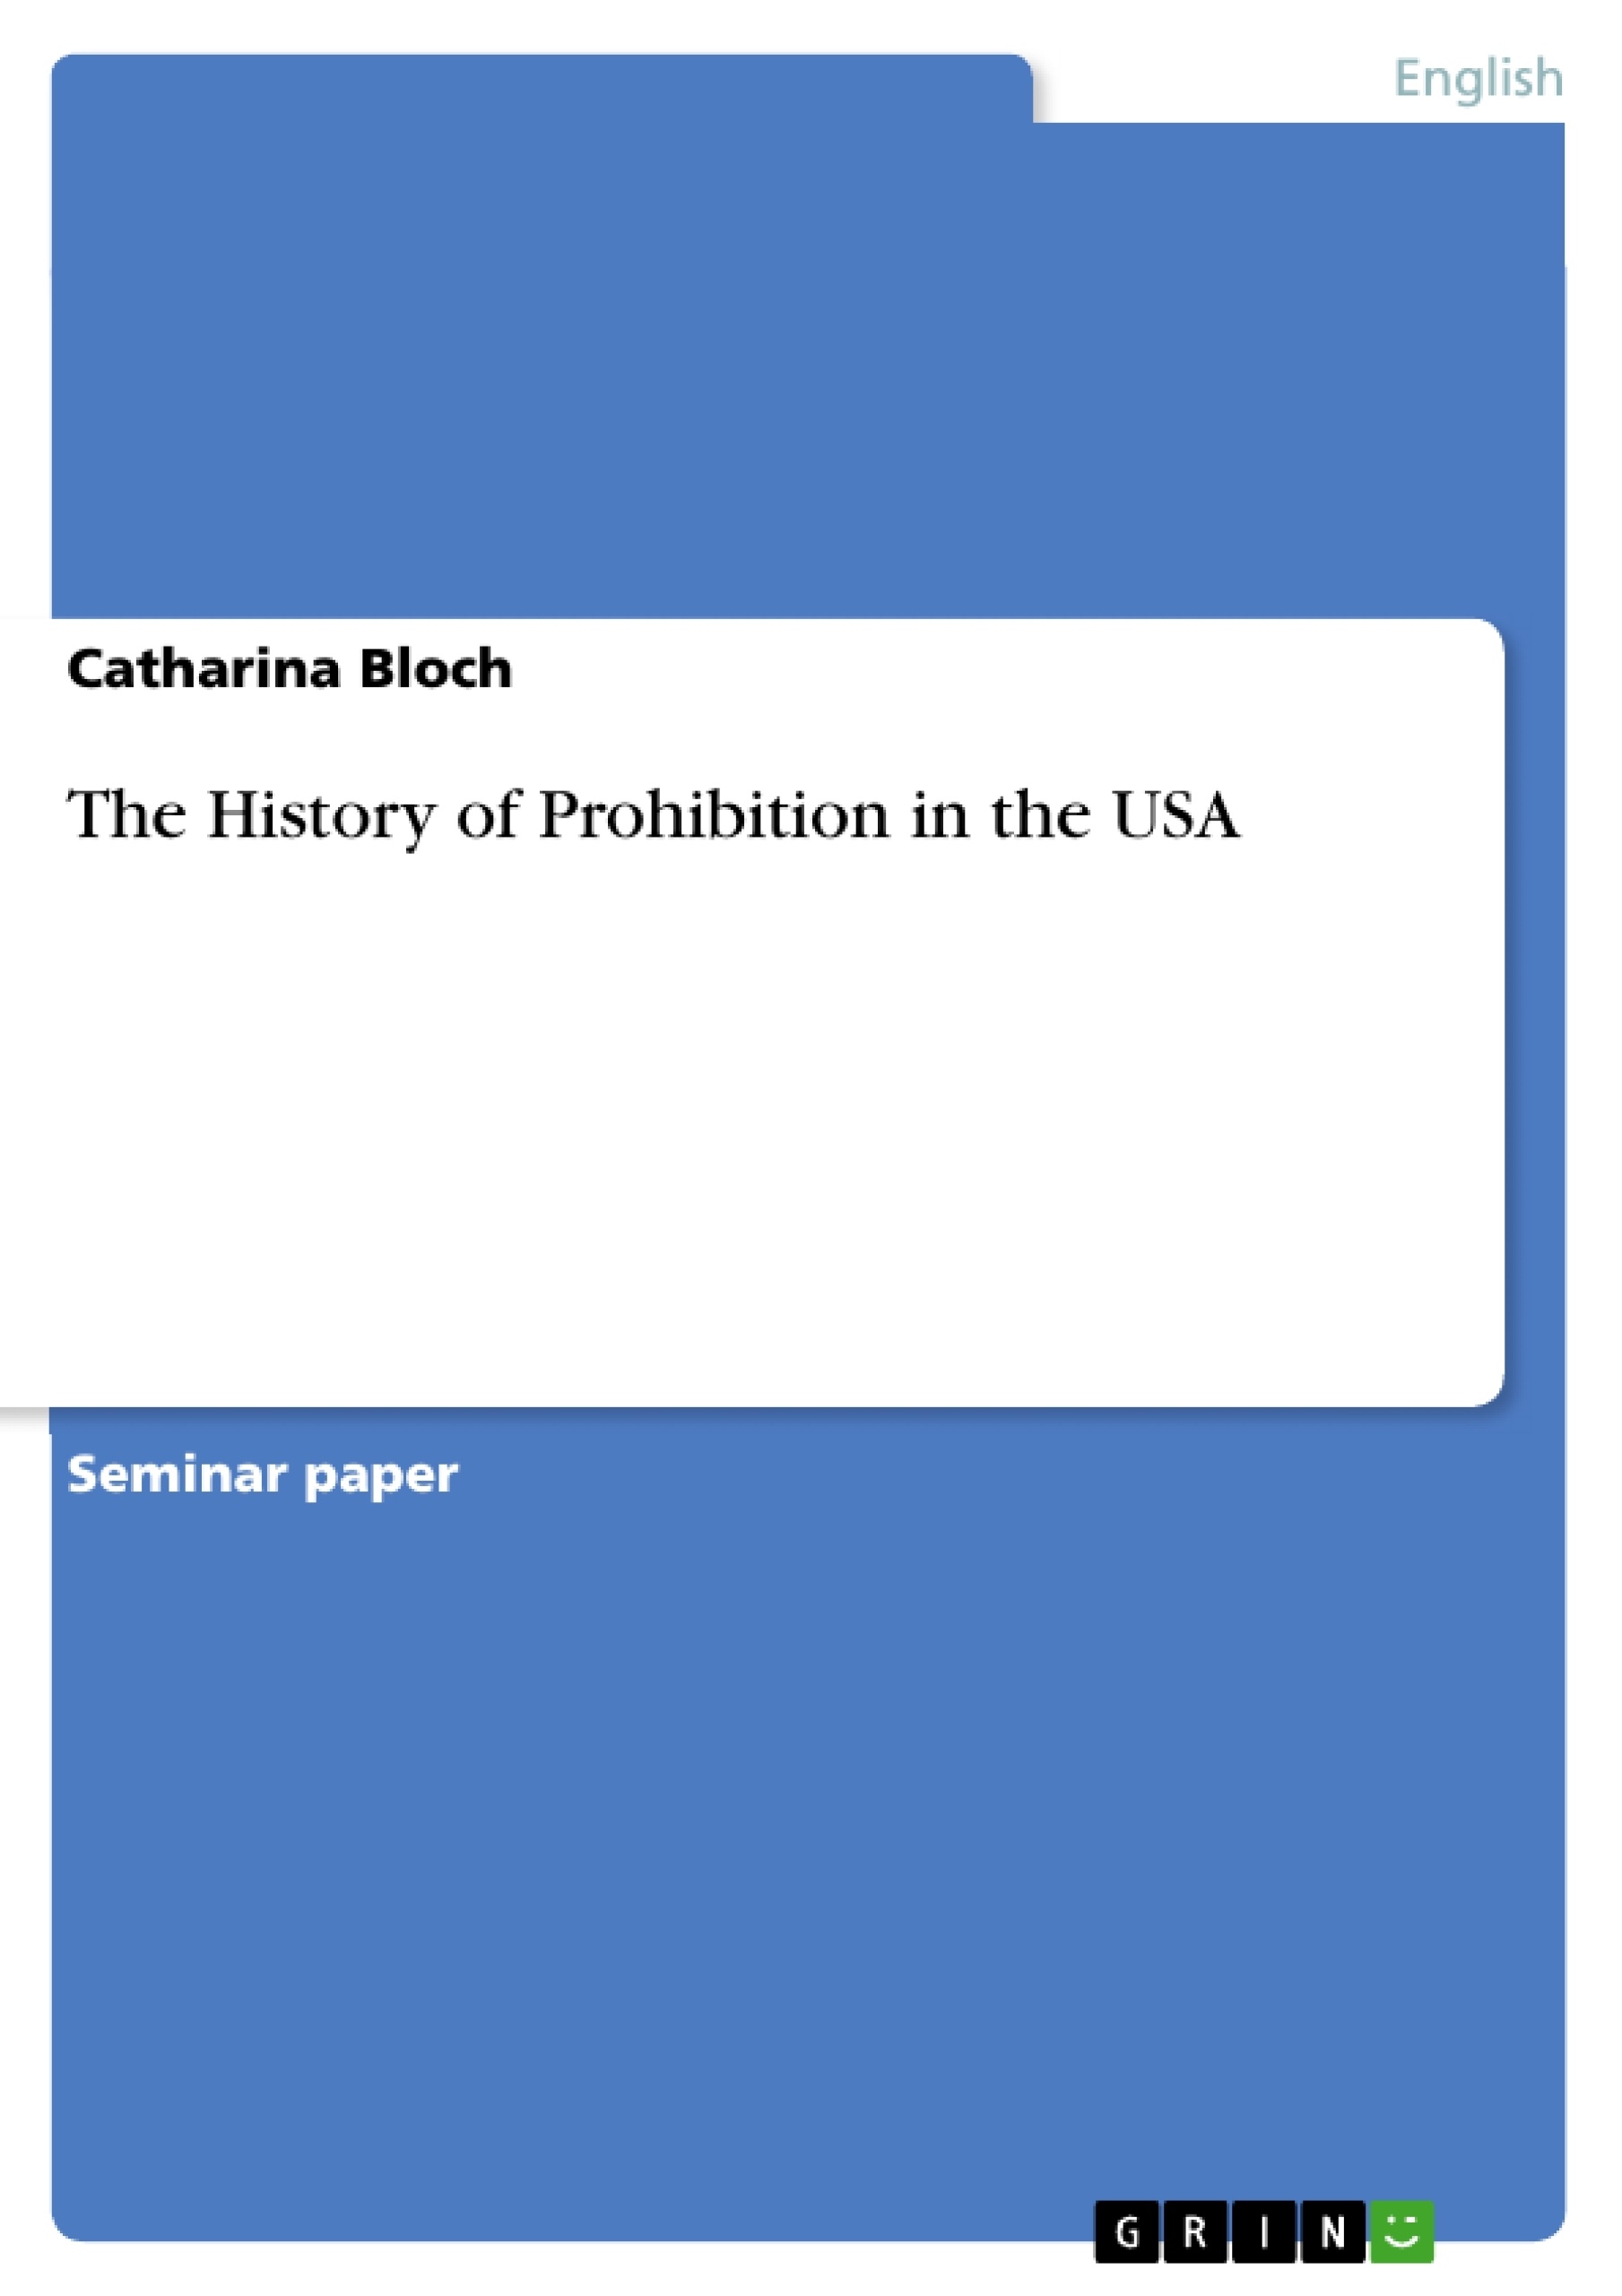 Title: The History of Prohibition in the USA